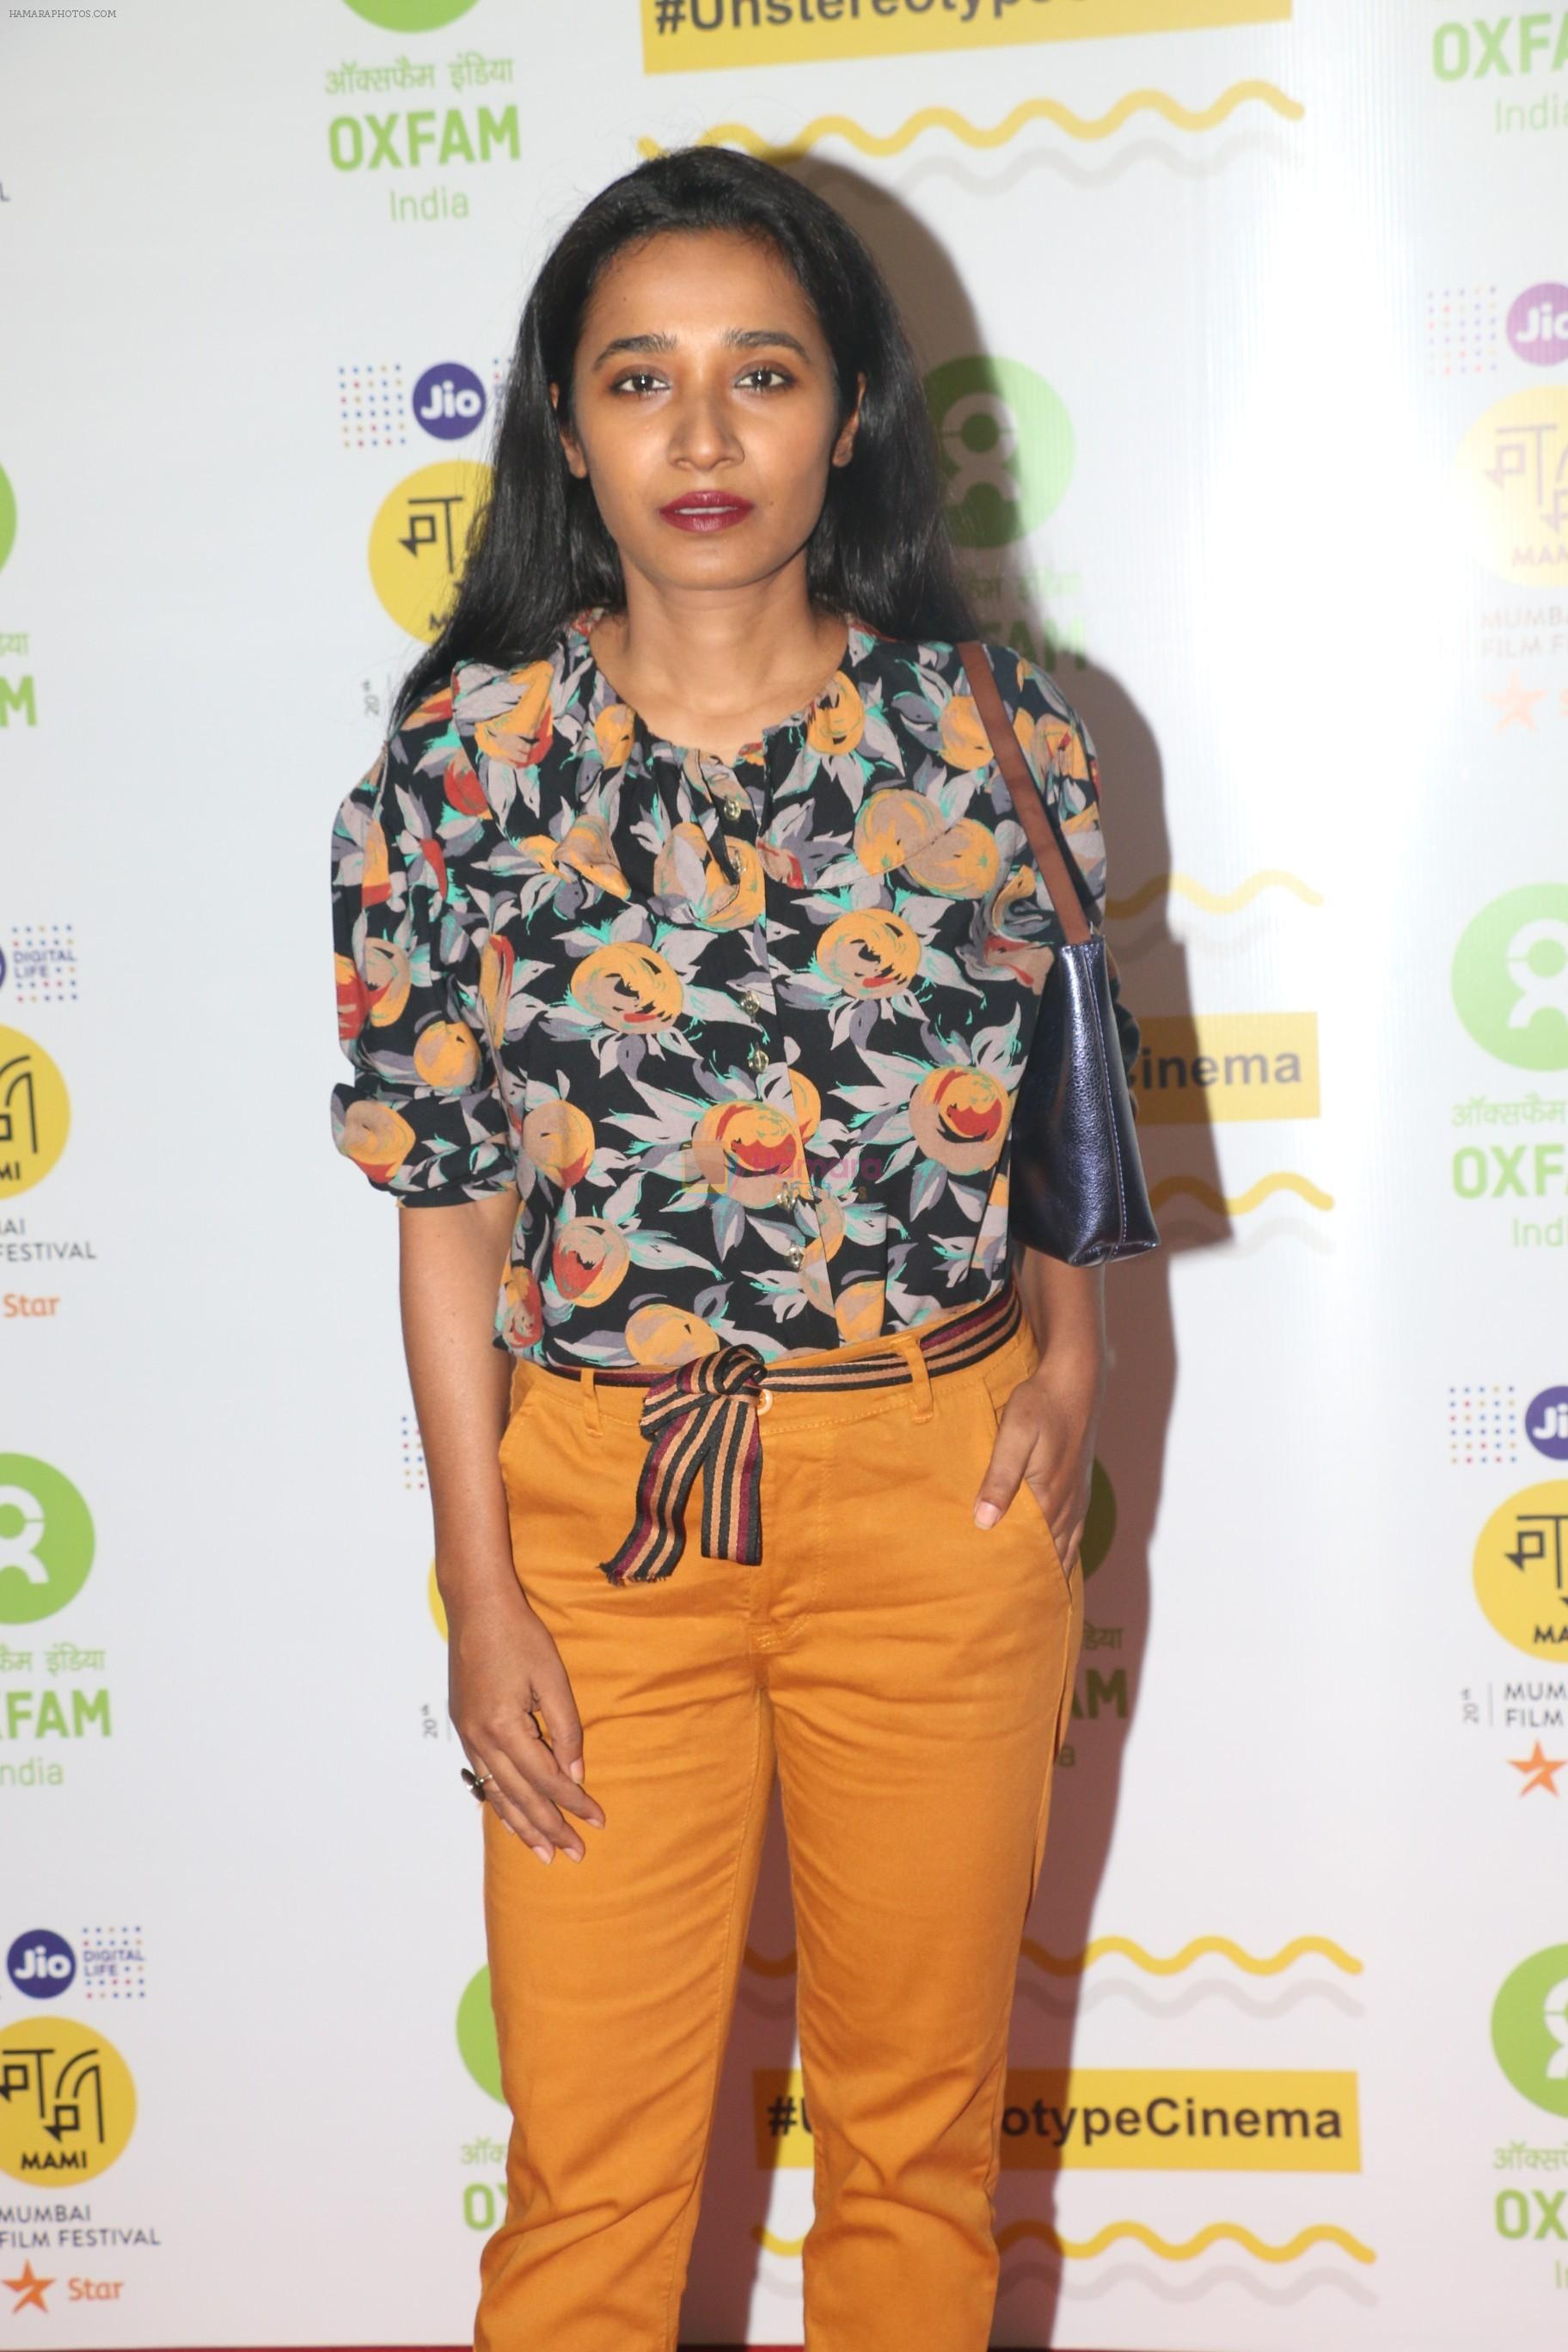 Tannishtha Chatterjee at the Red Carpet For Oxfam Mami Women In Film Brunch on 28th Oct 2018